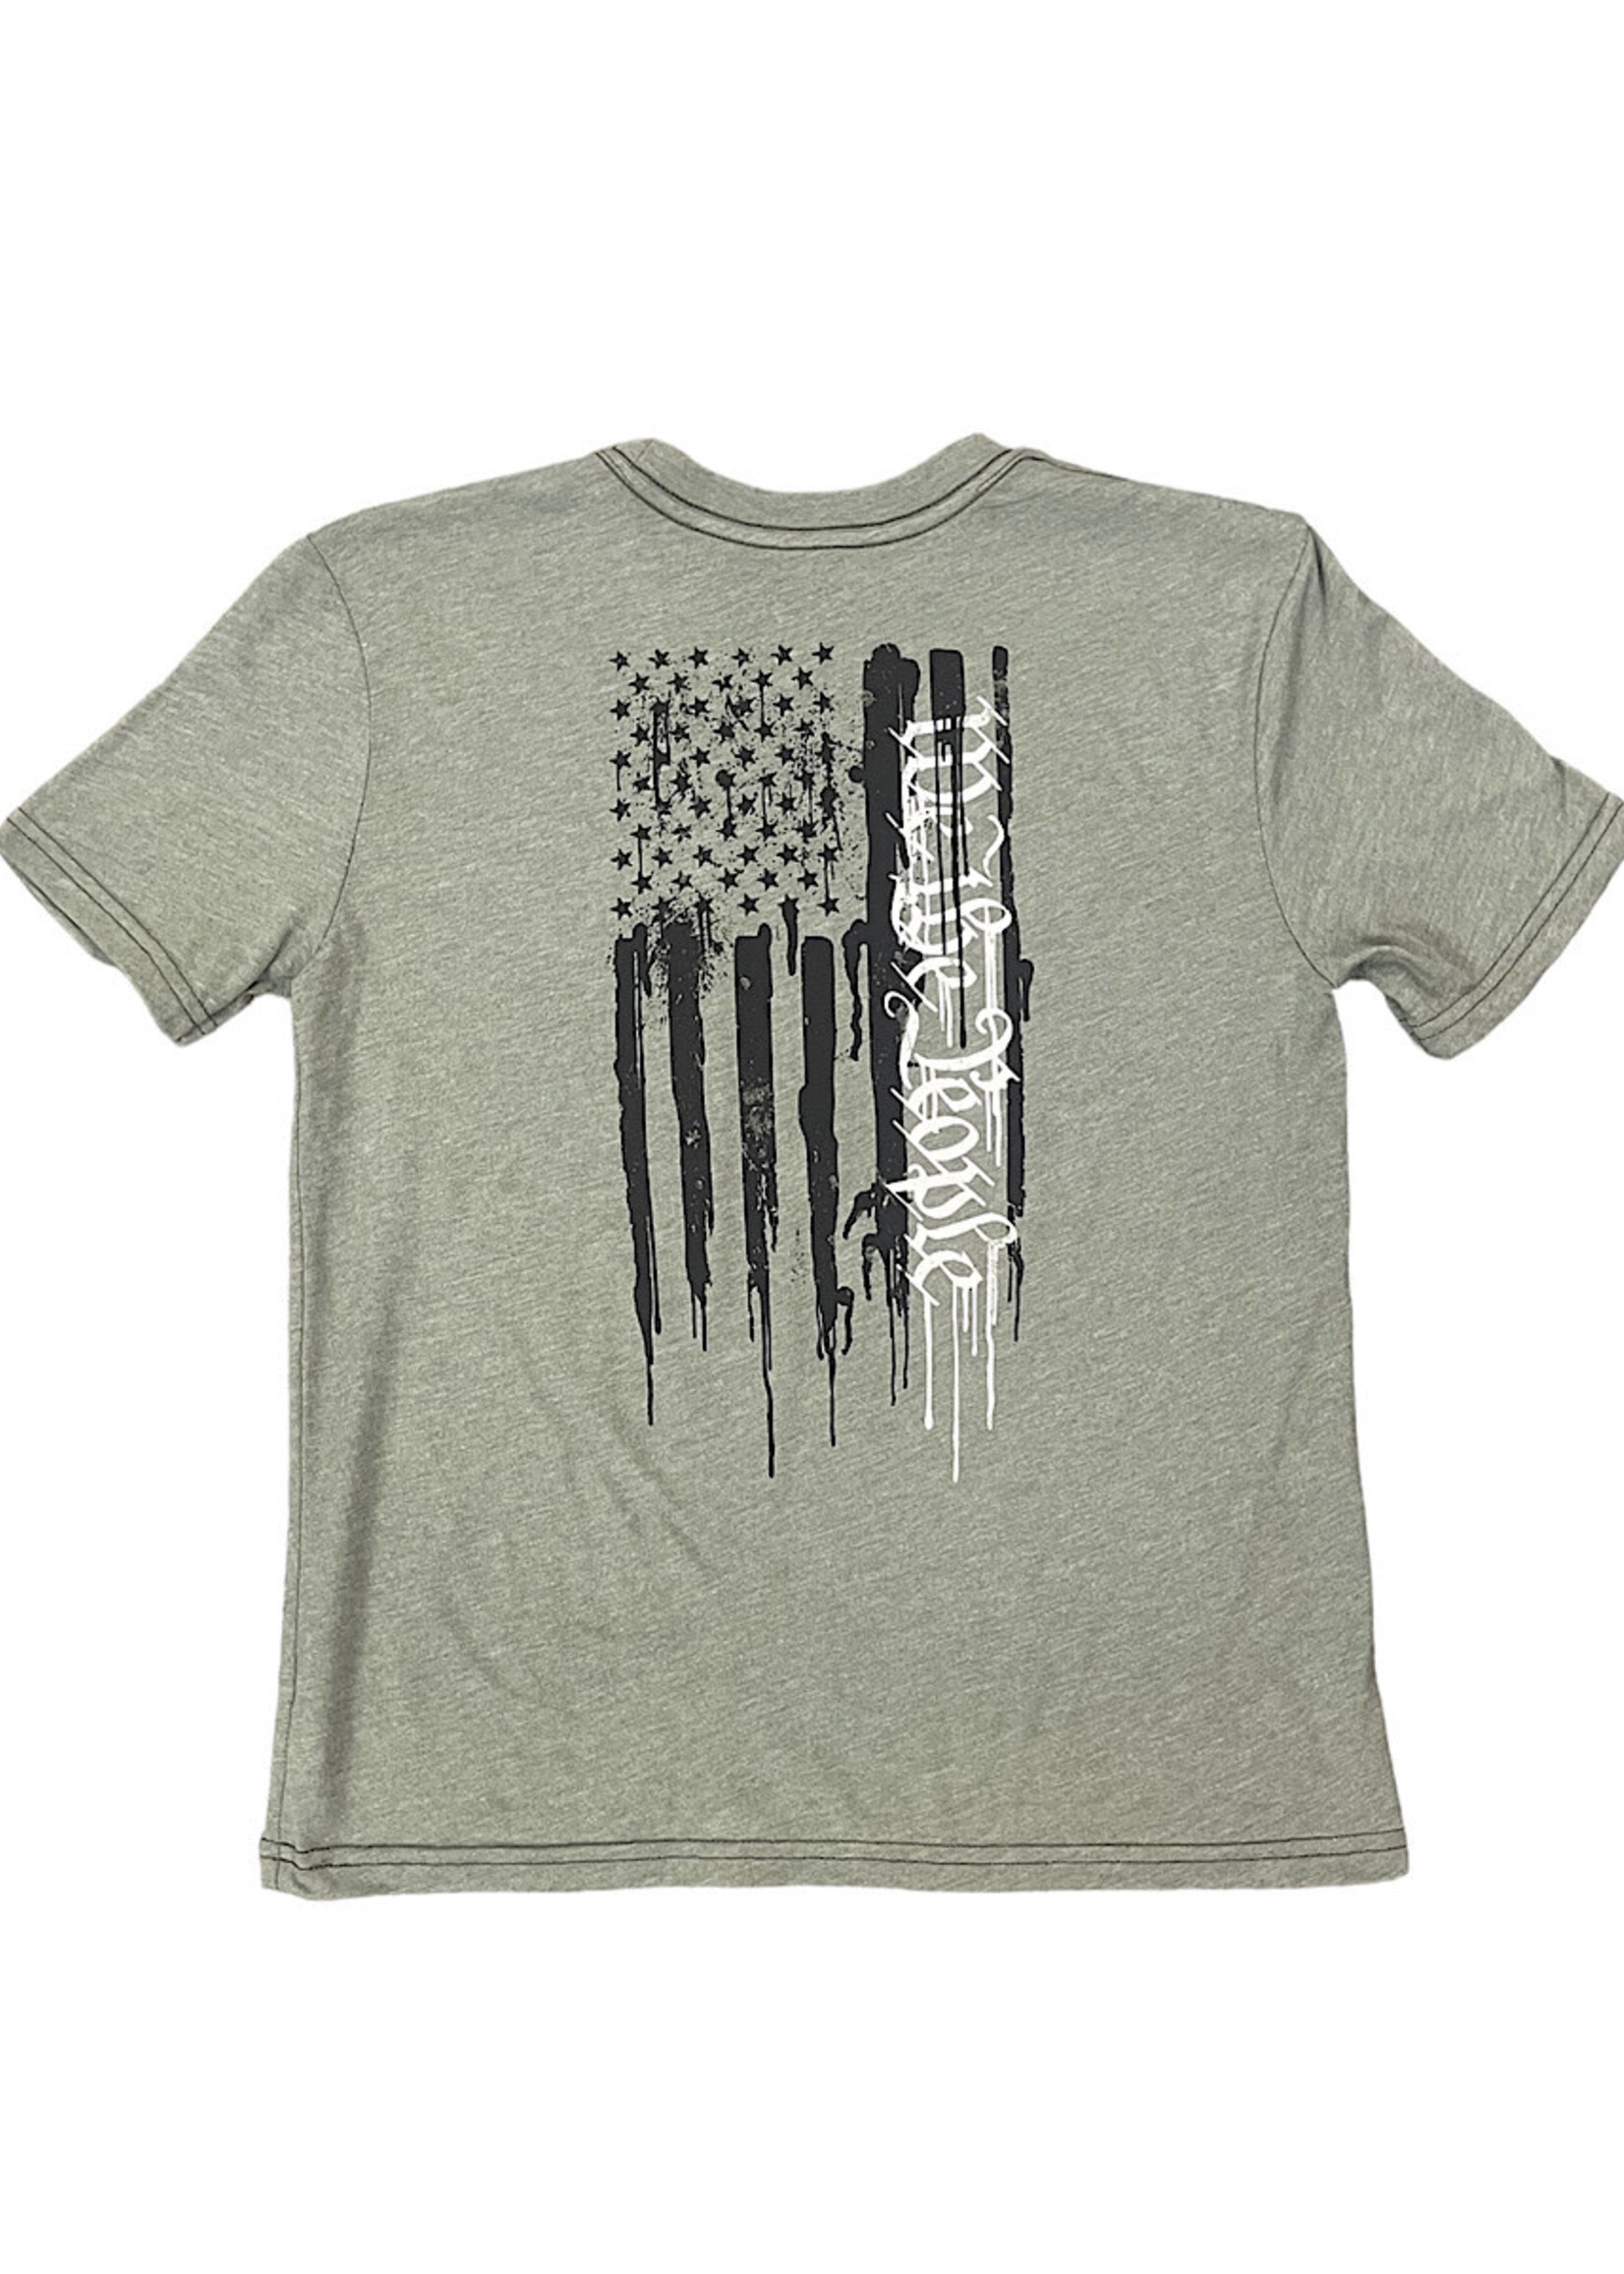 Howitzer Youth People Splatter S/S Tee- Olive Heather